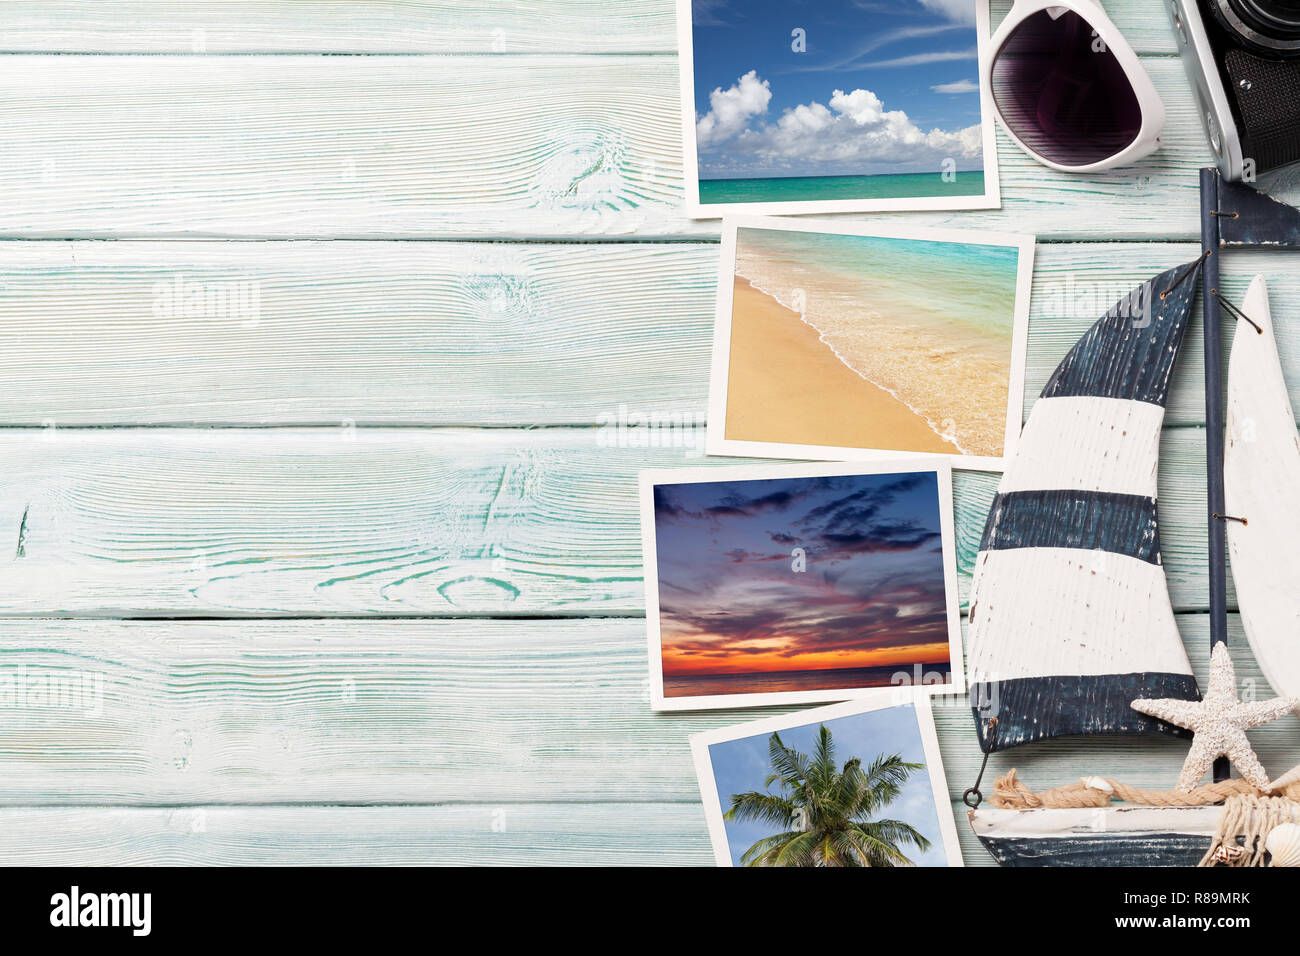 Travel vacation background concept with sunglasses, camera and weekend photos on wooden backdrop. Top view with copy space. Flat lay. All photos taken Stock Photo